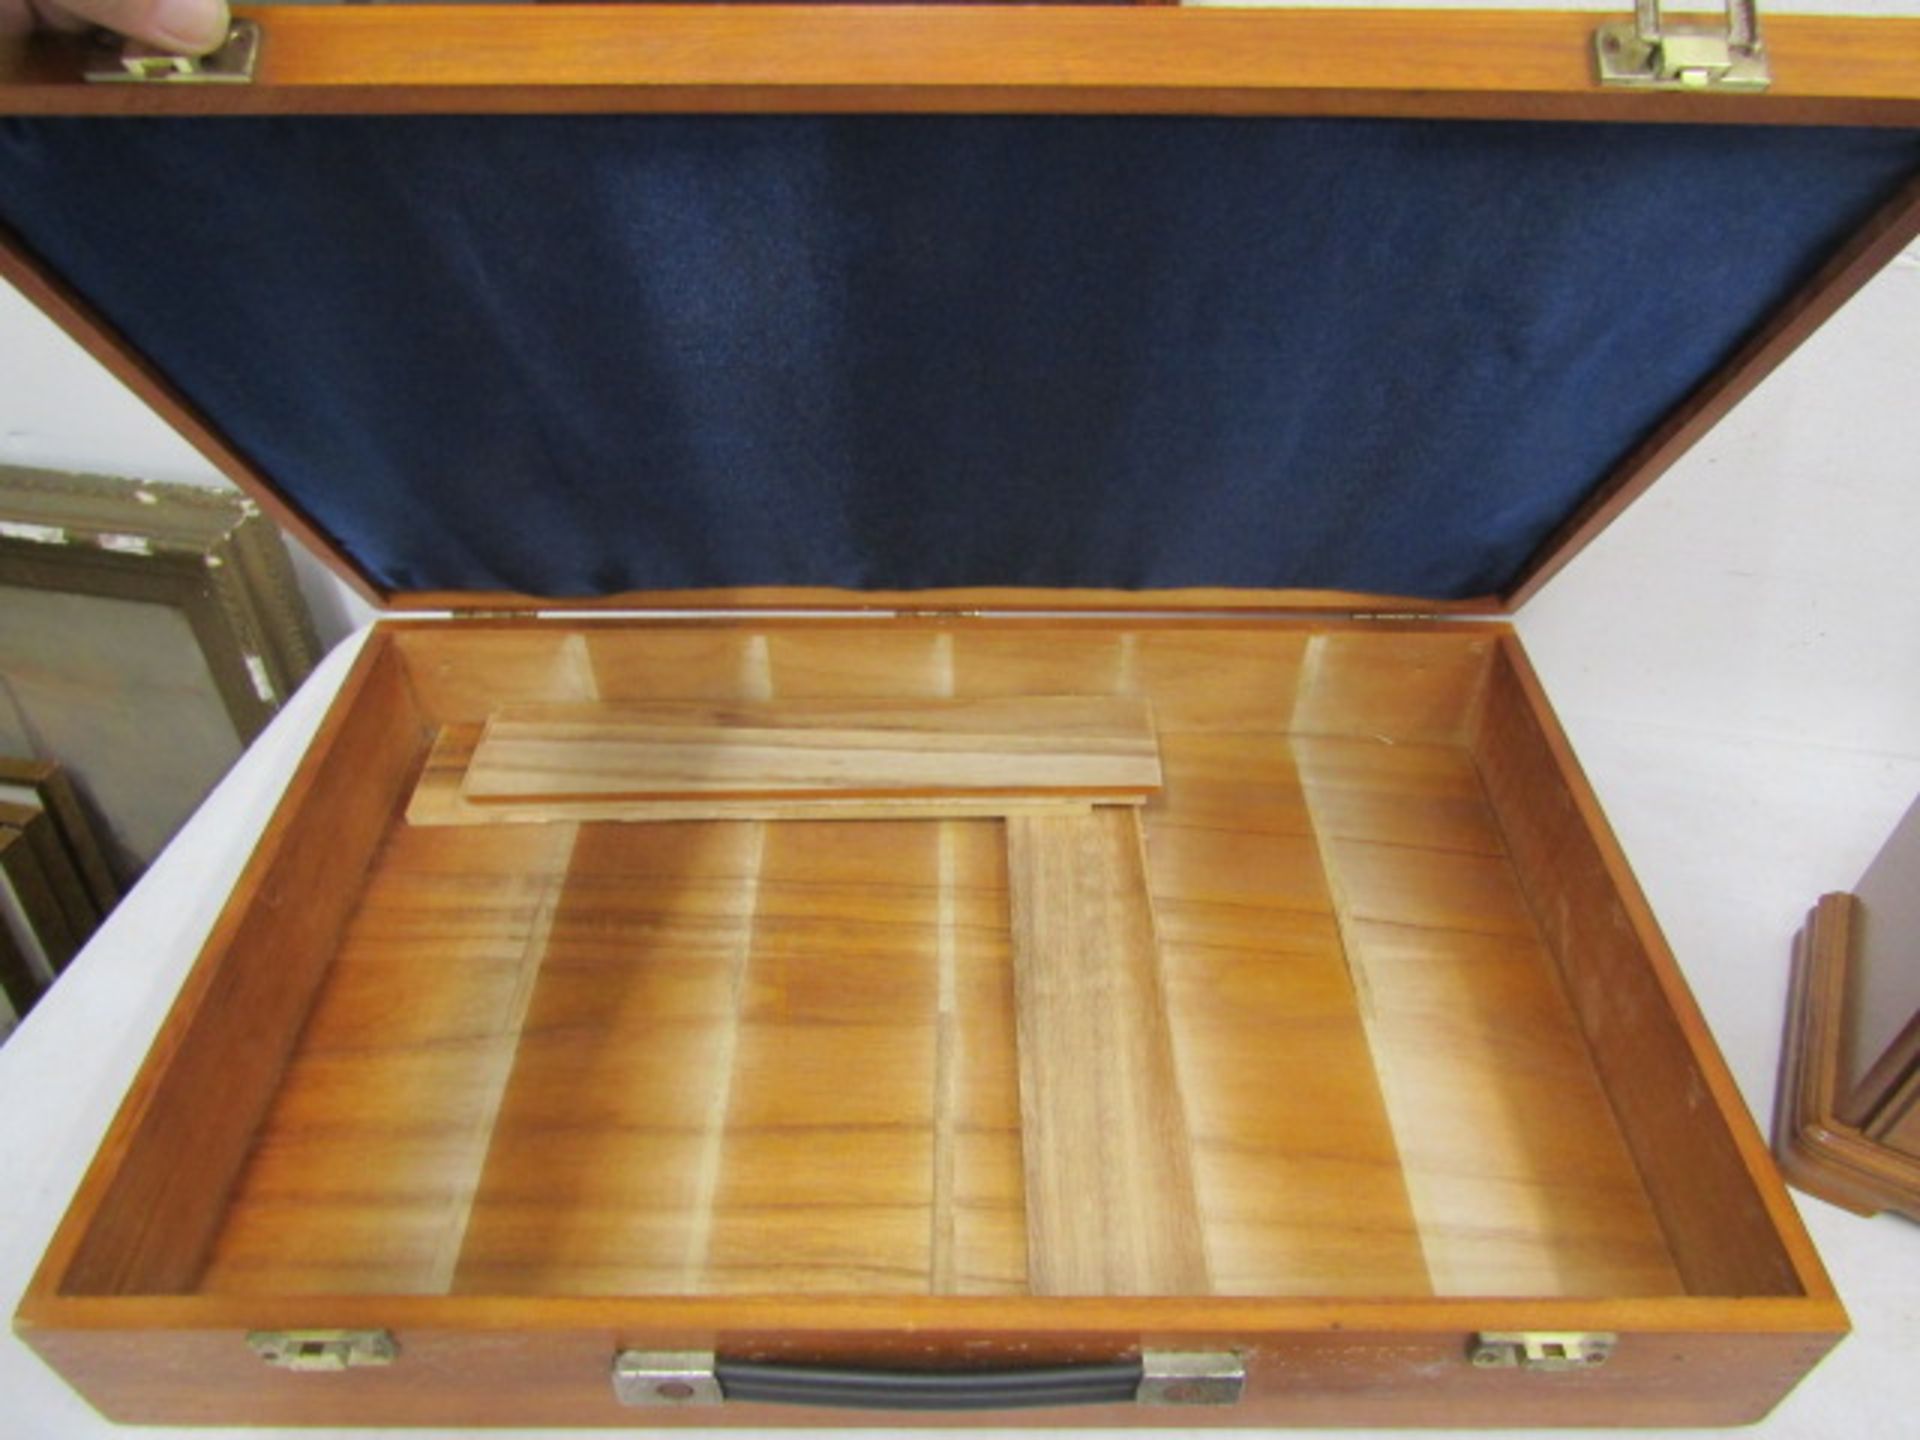 A jewellery box, display case and jewellery display stand - Image 6 of 6